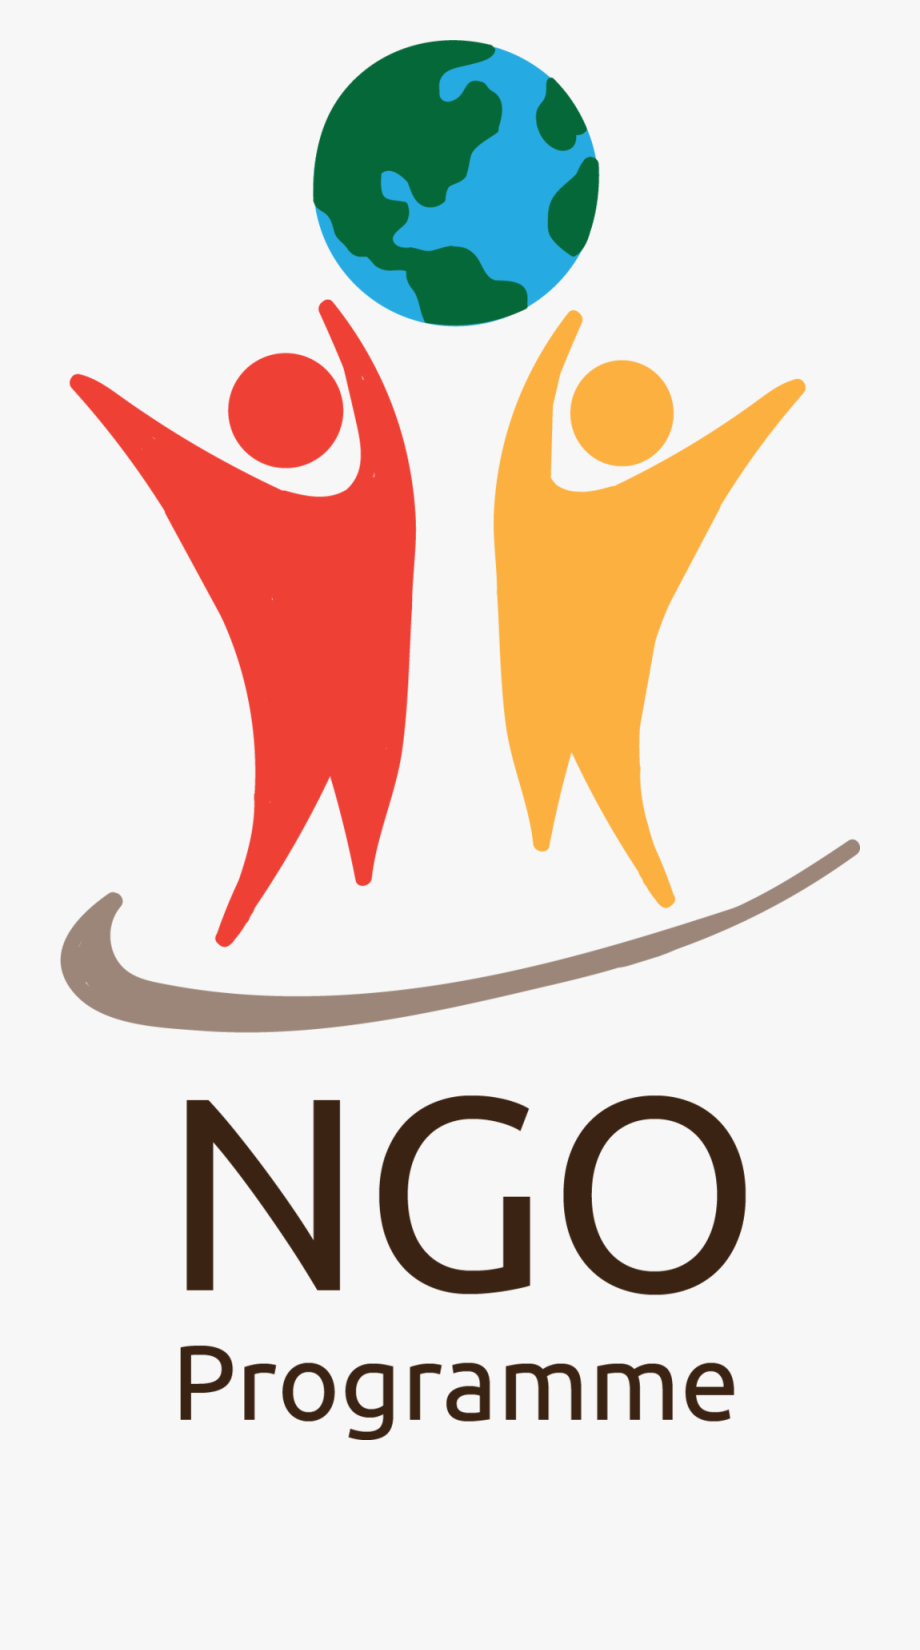 Create Ngo Logo Online - Free Vectors & PSDs to Download